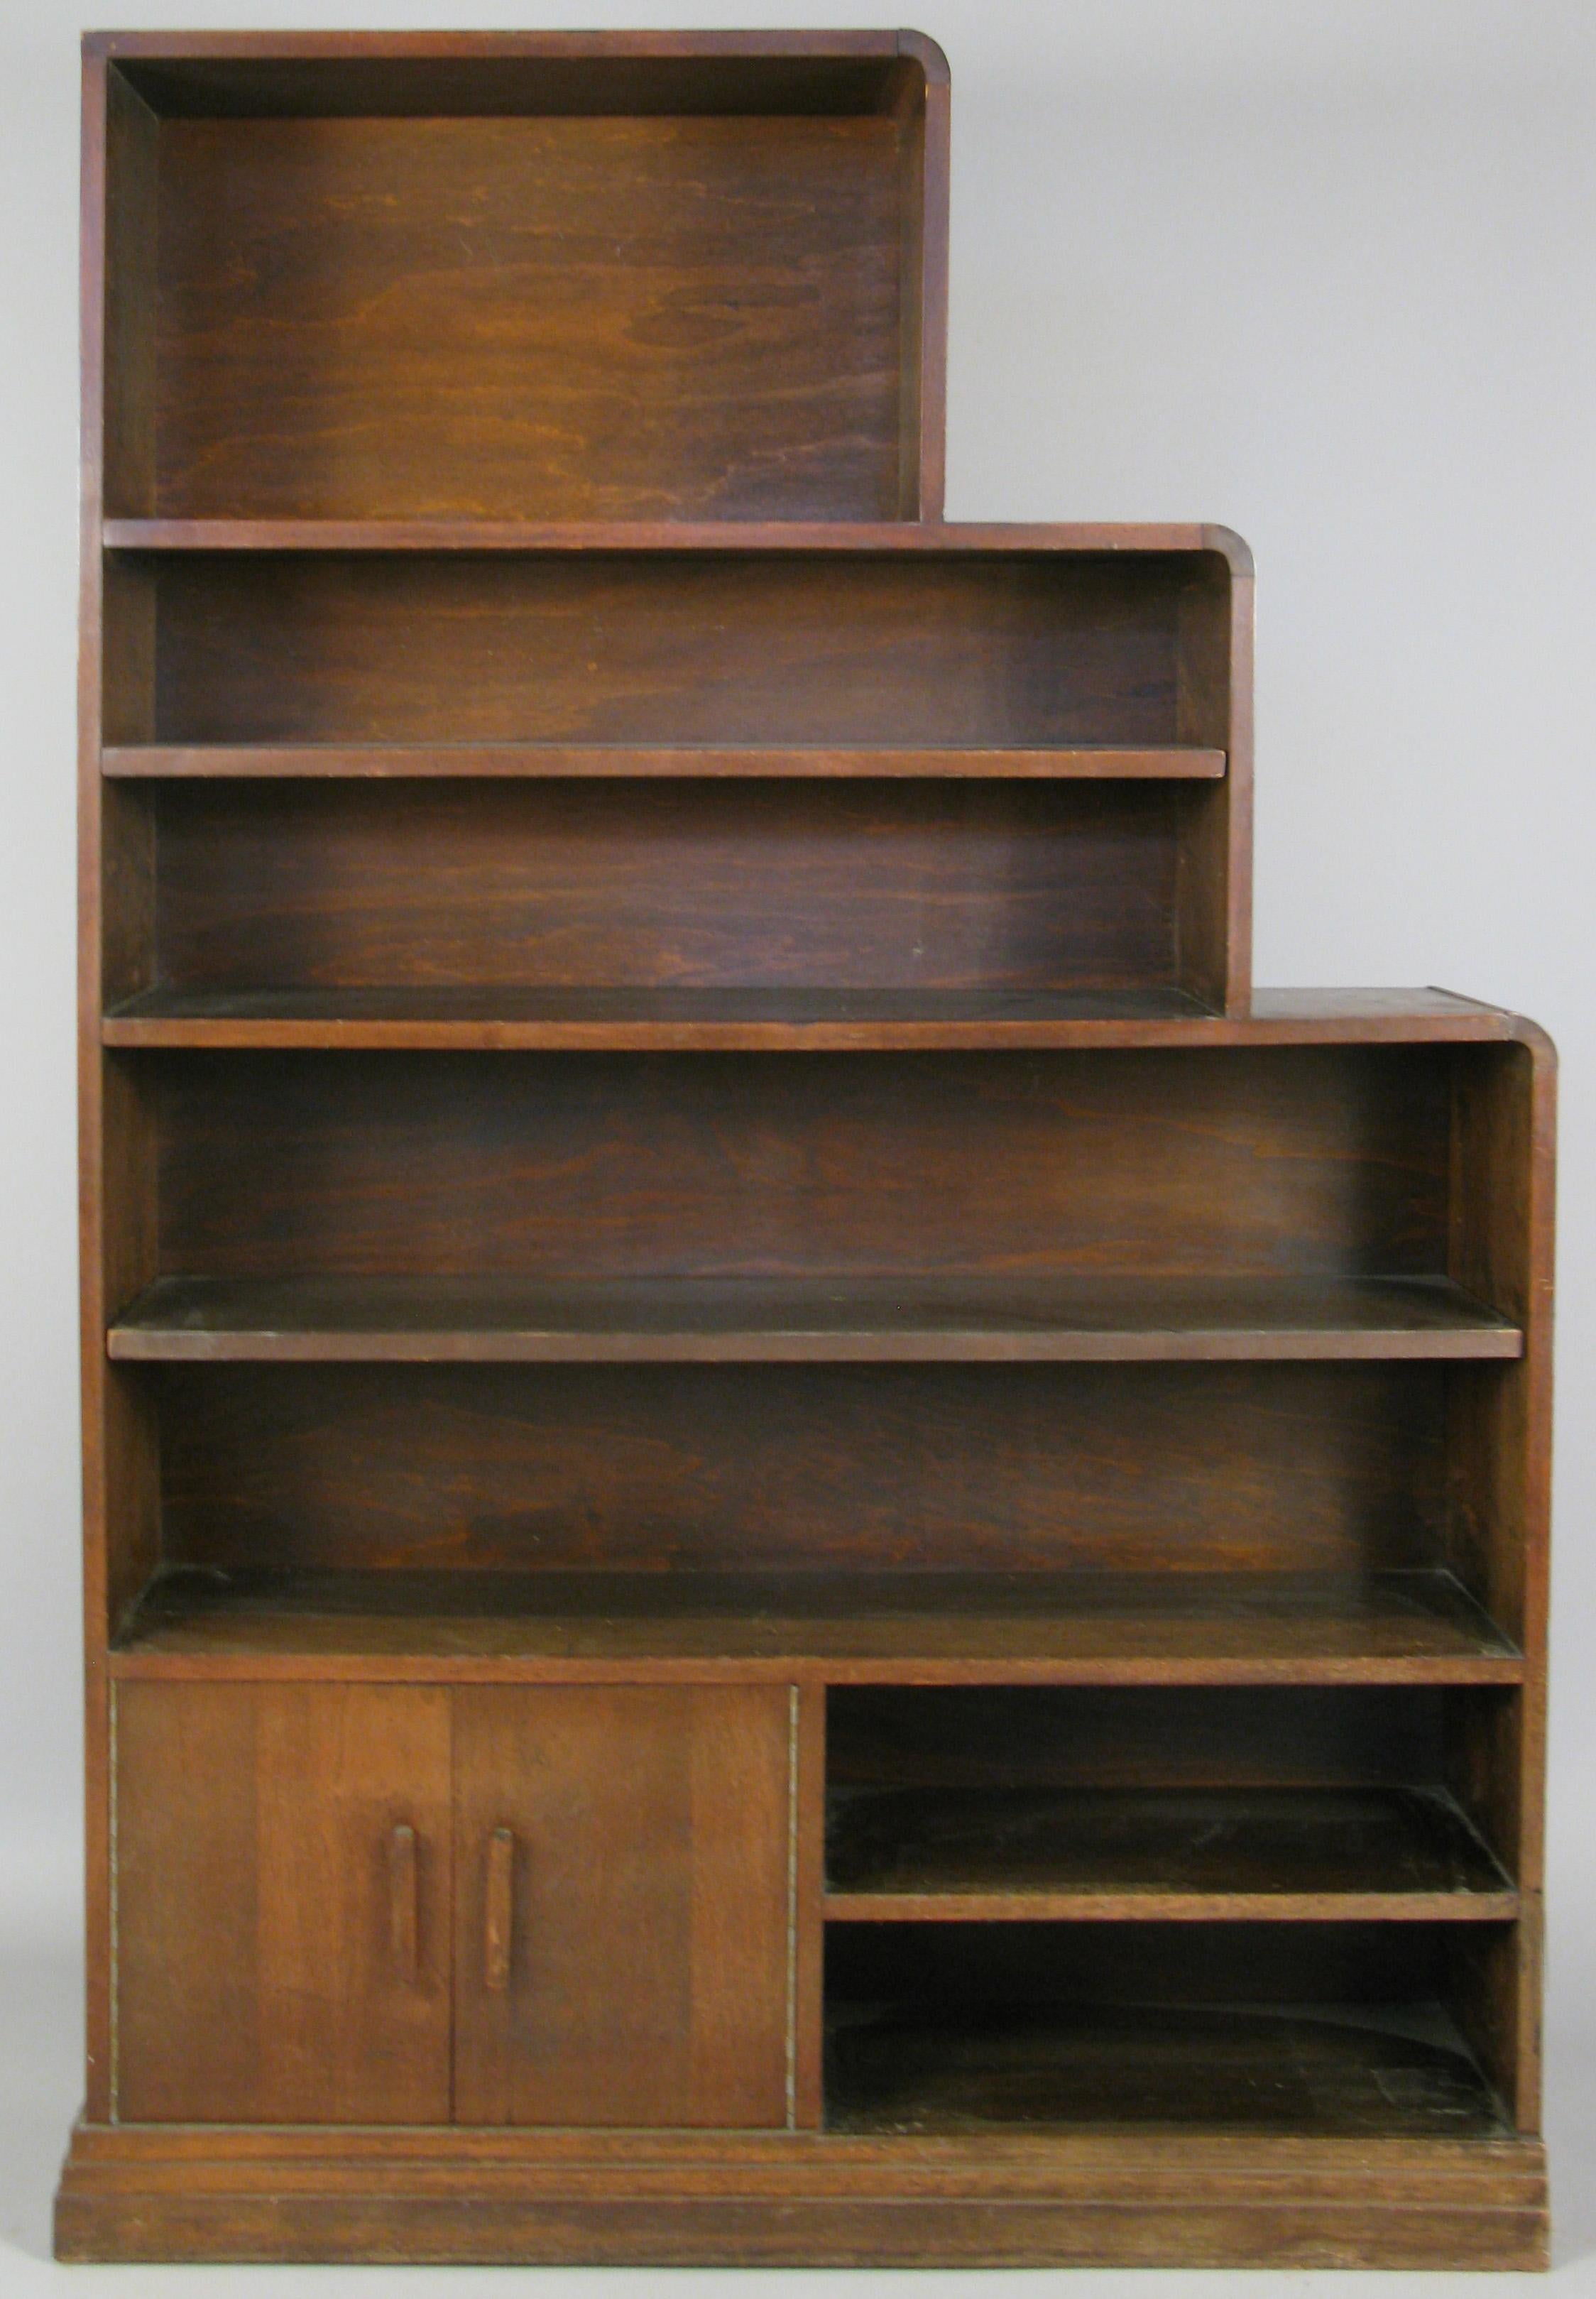 a very handsome pair of 1940s walnut bookcases in a skyscraper form, with adjustable shelves in two of the sections in each bookcase. the pair are designed as mirror images, so that if placed side by side they make a complete skyscraper form.